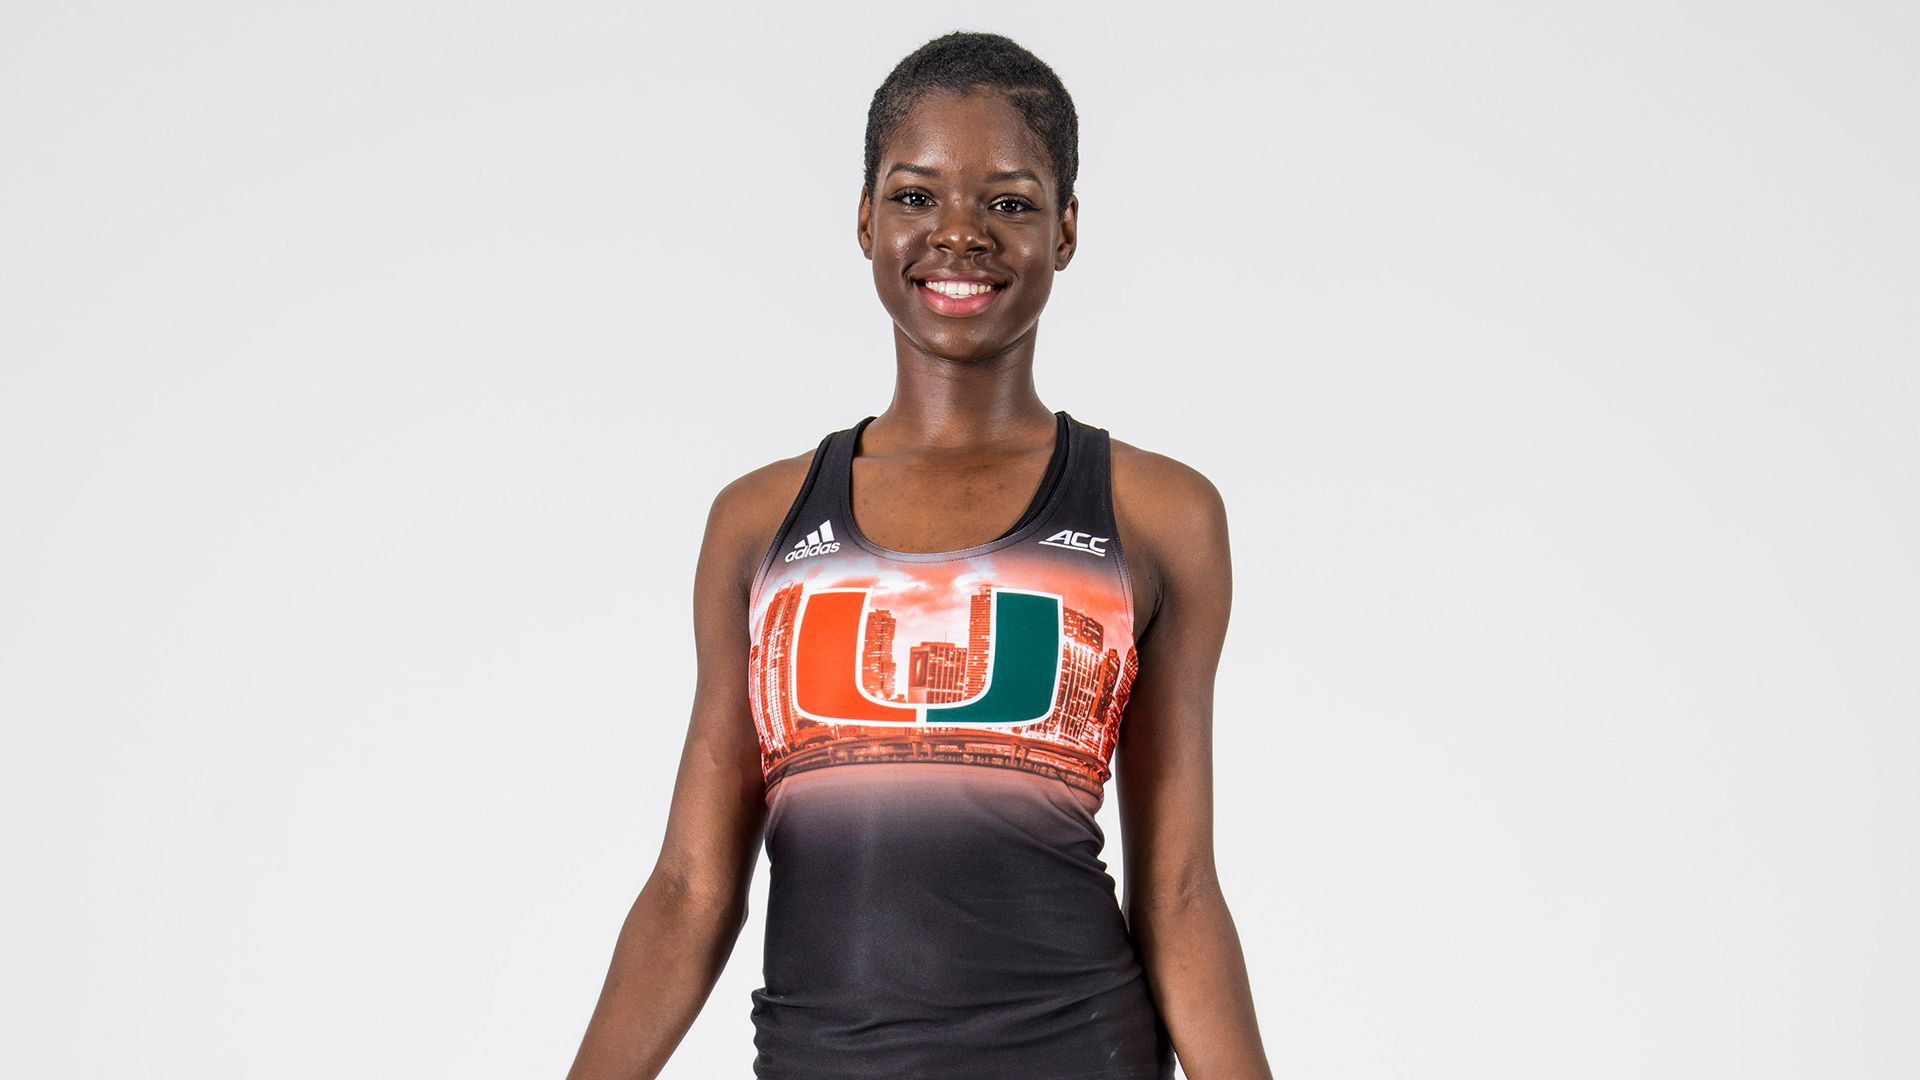 Young Canes Shine on Day 3 at ACC Indoor Championships